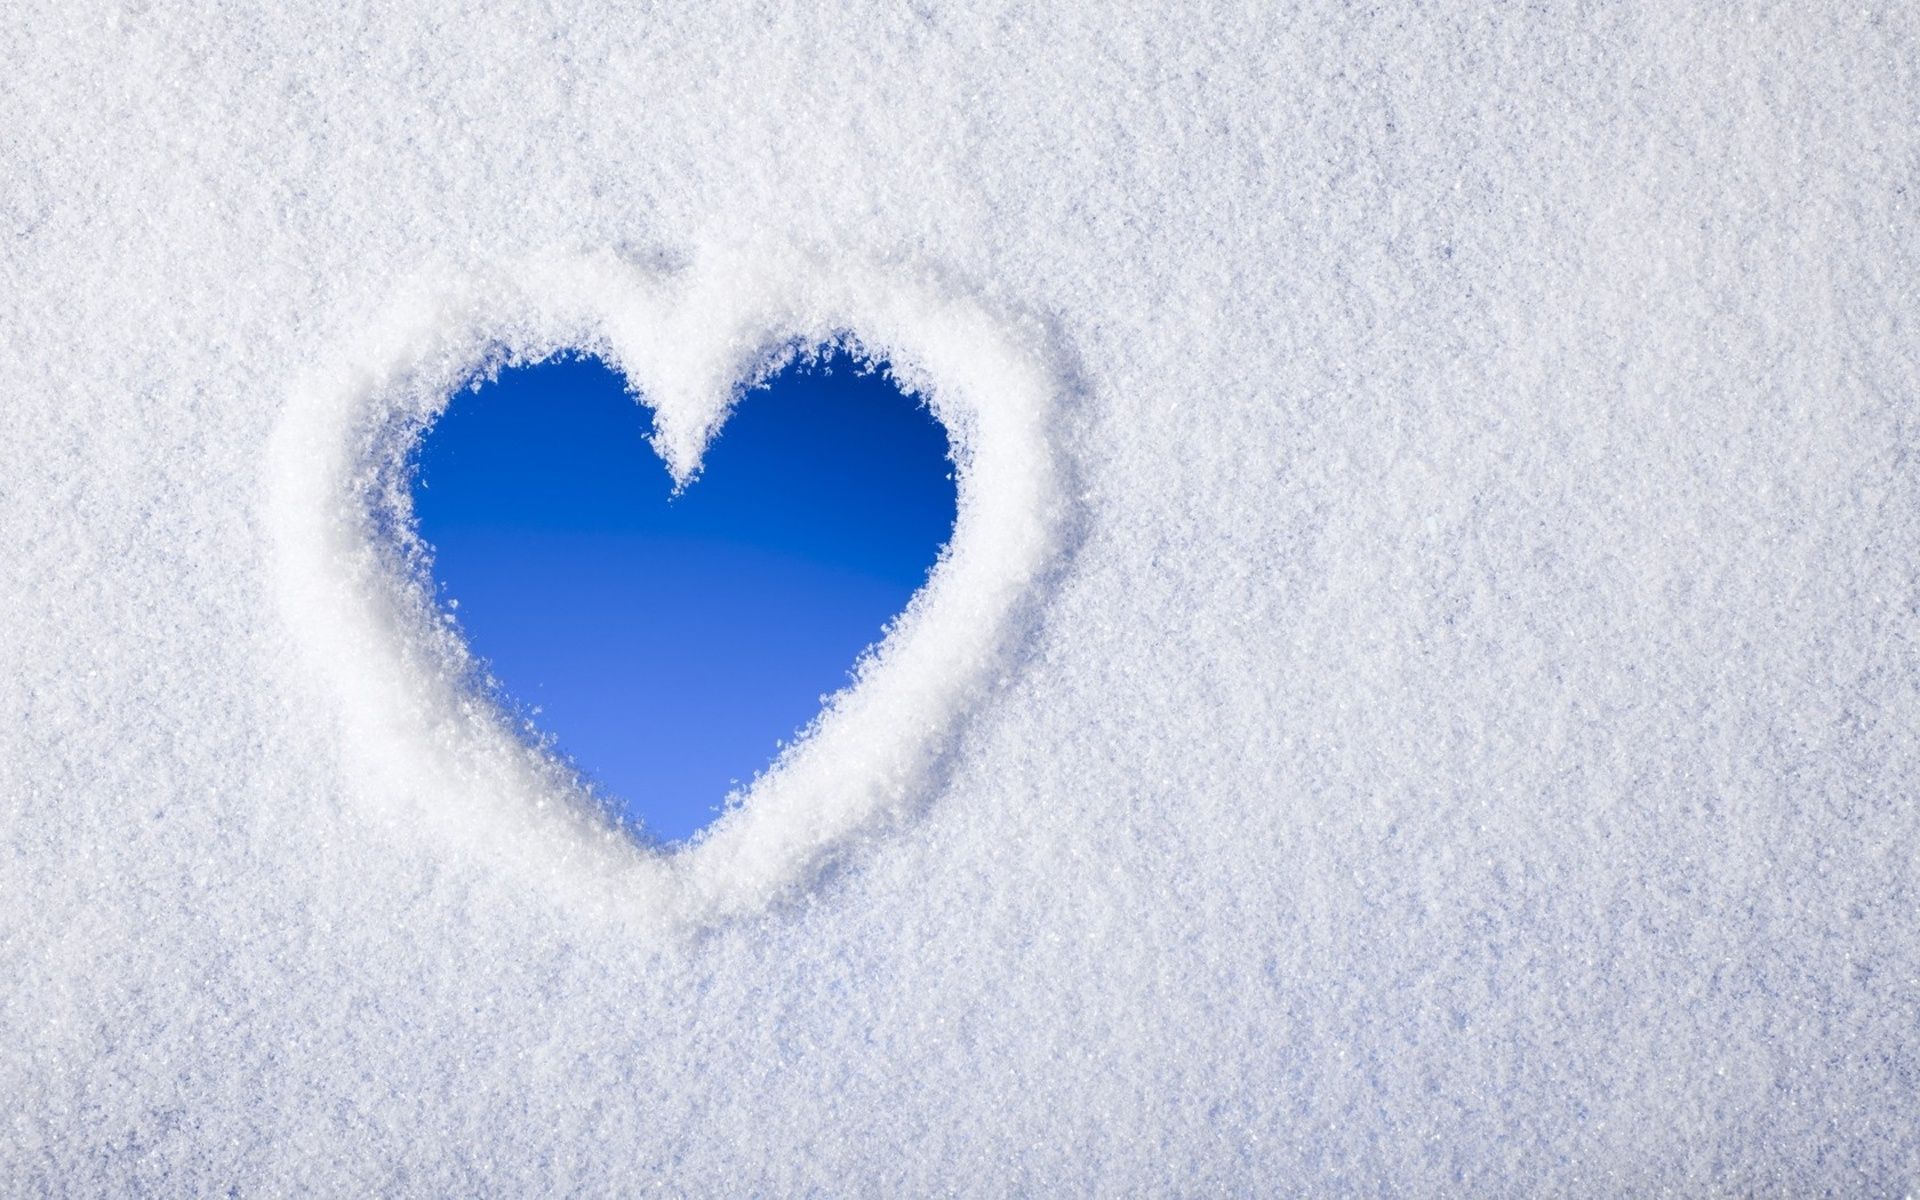 Snow Heart Wallpapers | HD Wallpapers